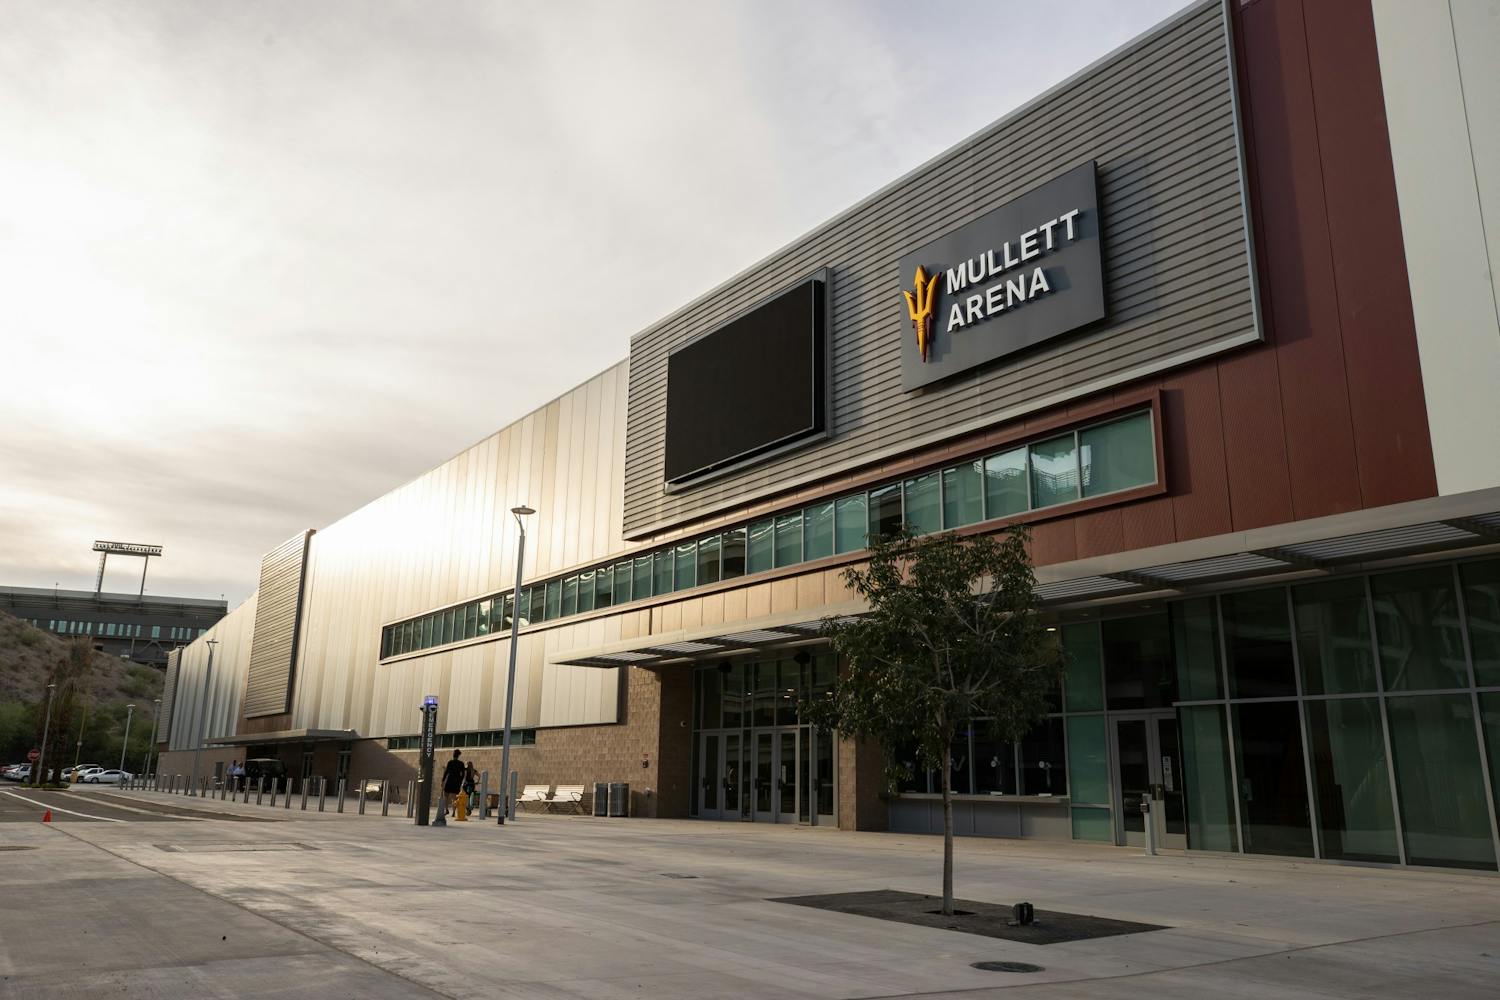 Coyotes Officially Moving To New ASU Arena On Temporary Basis